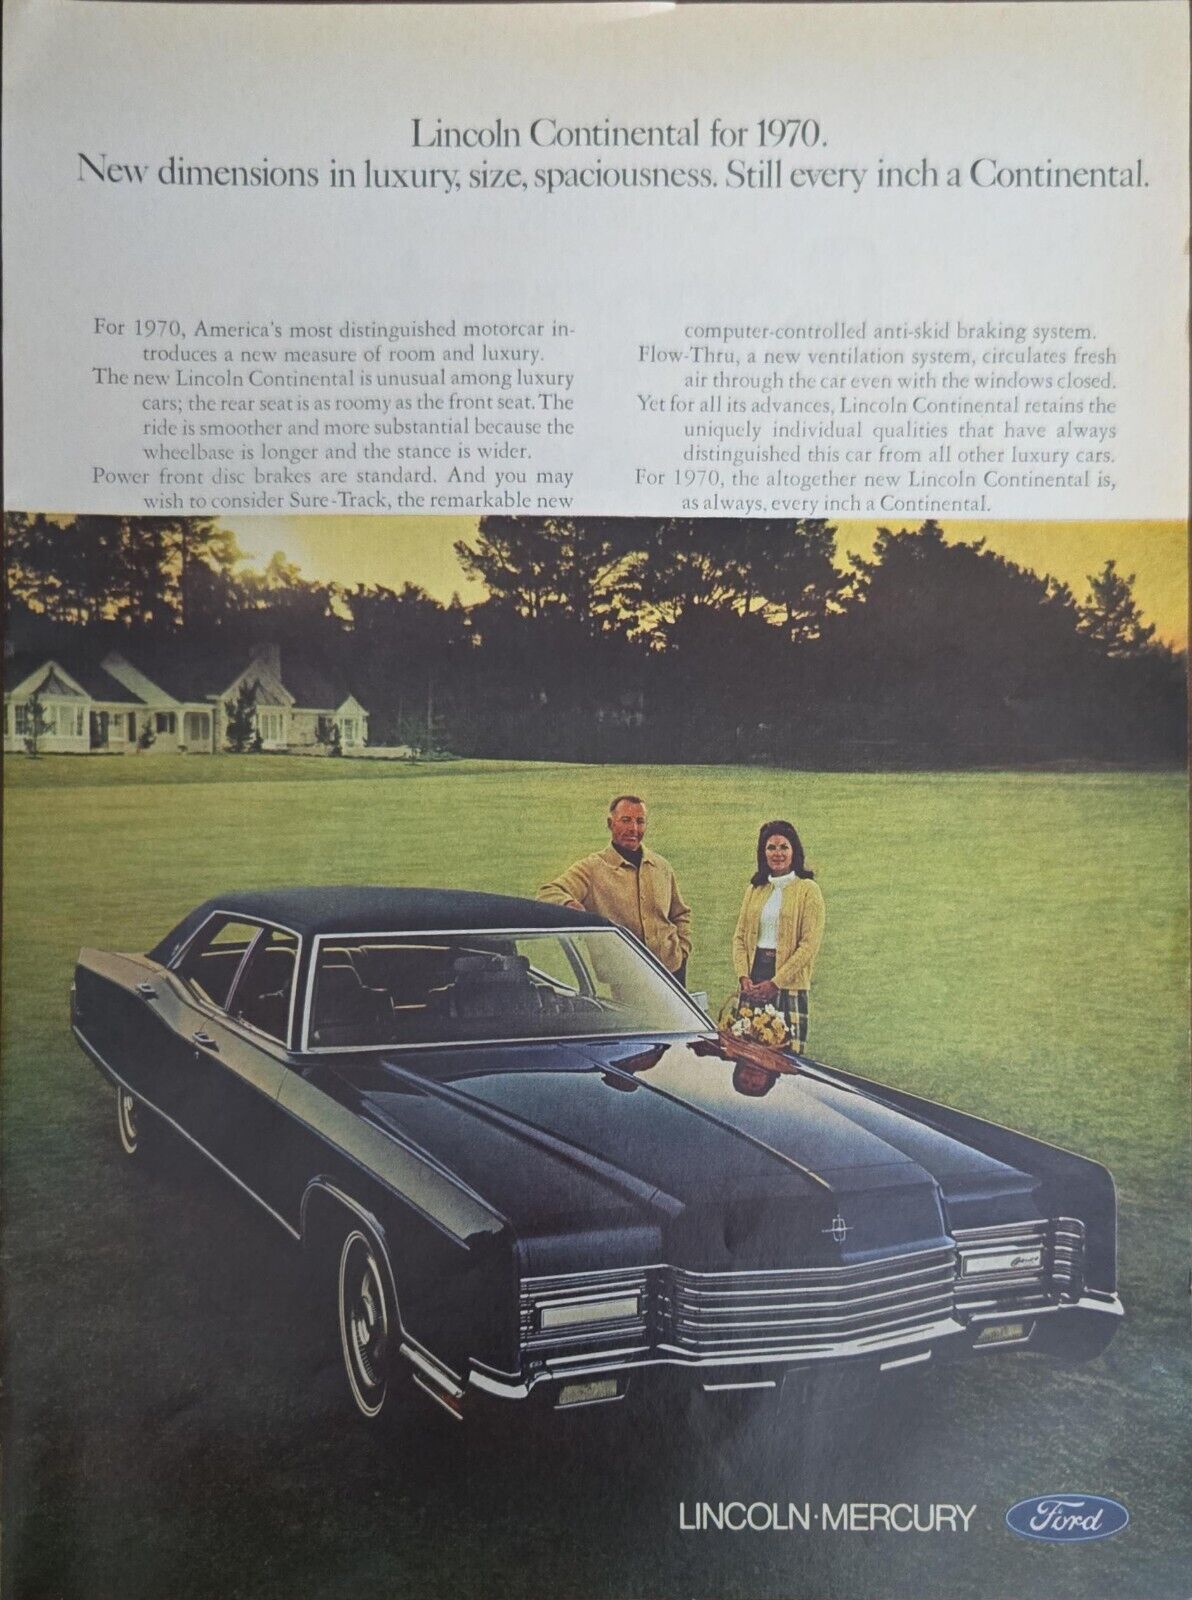 1969 Vintage Print Ad Ford Lincoln Mercury New In 1970 Spacious Man & Woman